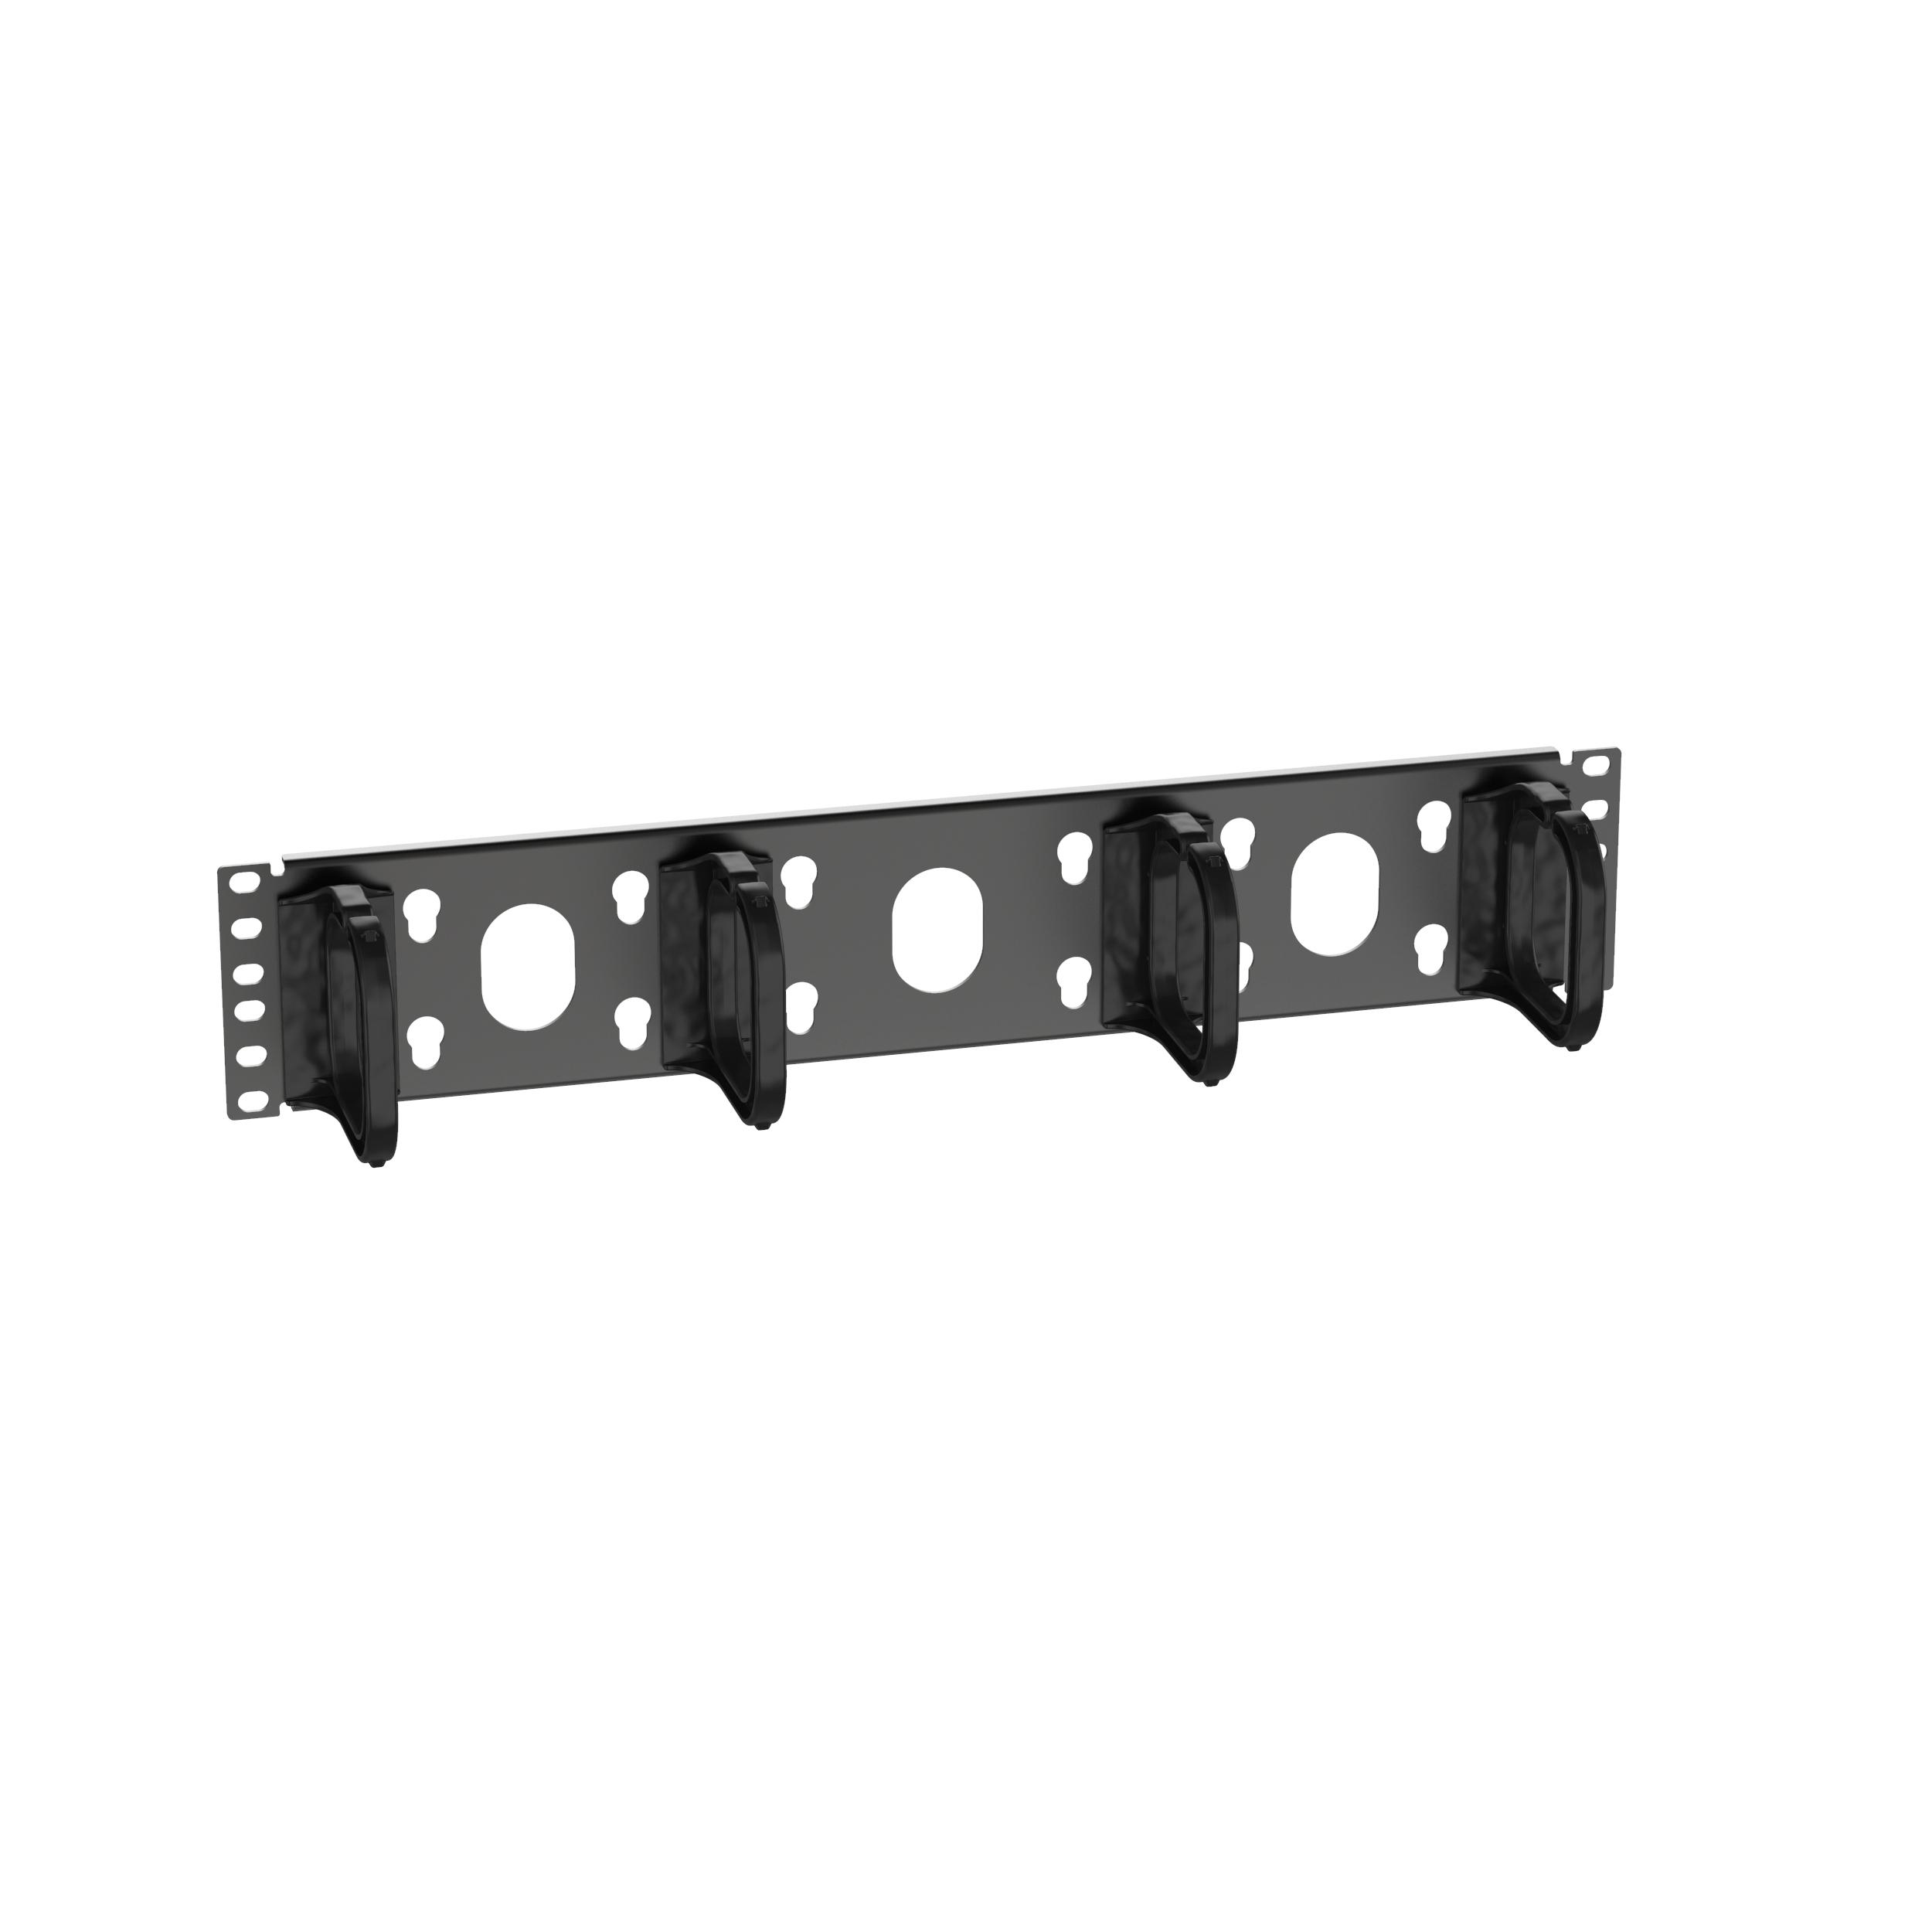 Panduit CMPHF2 CABLE MGMT D-RING PANEL HORZ19"W X 3.5"H X 4"D FRONT ONLYBLACK 2RMU ROHS